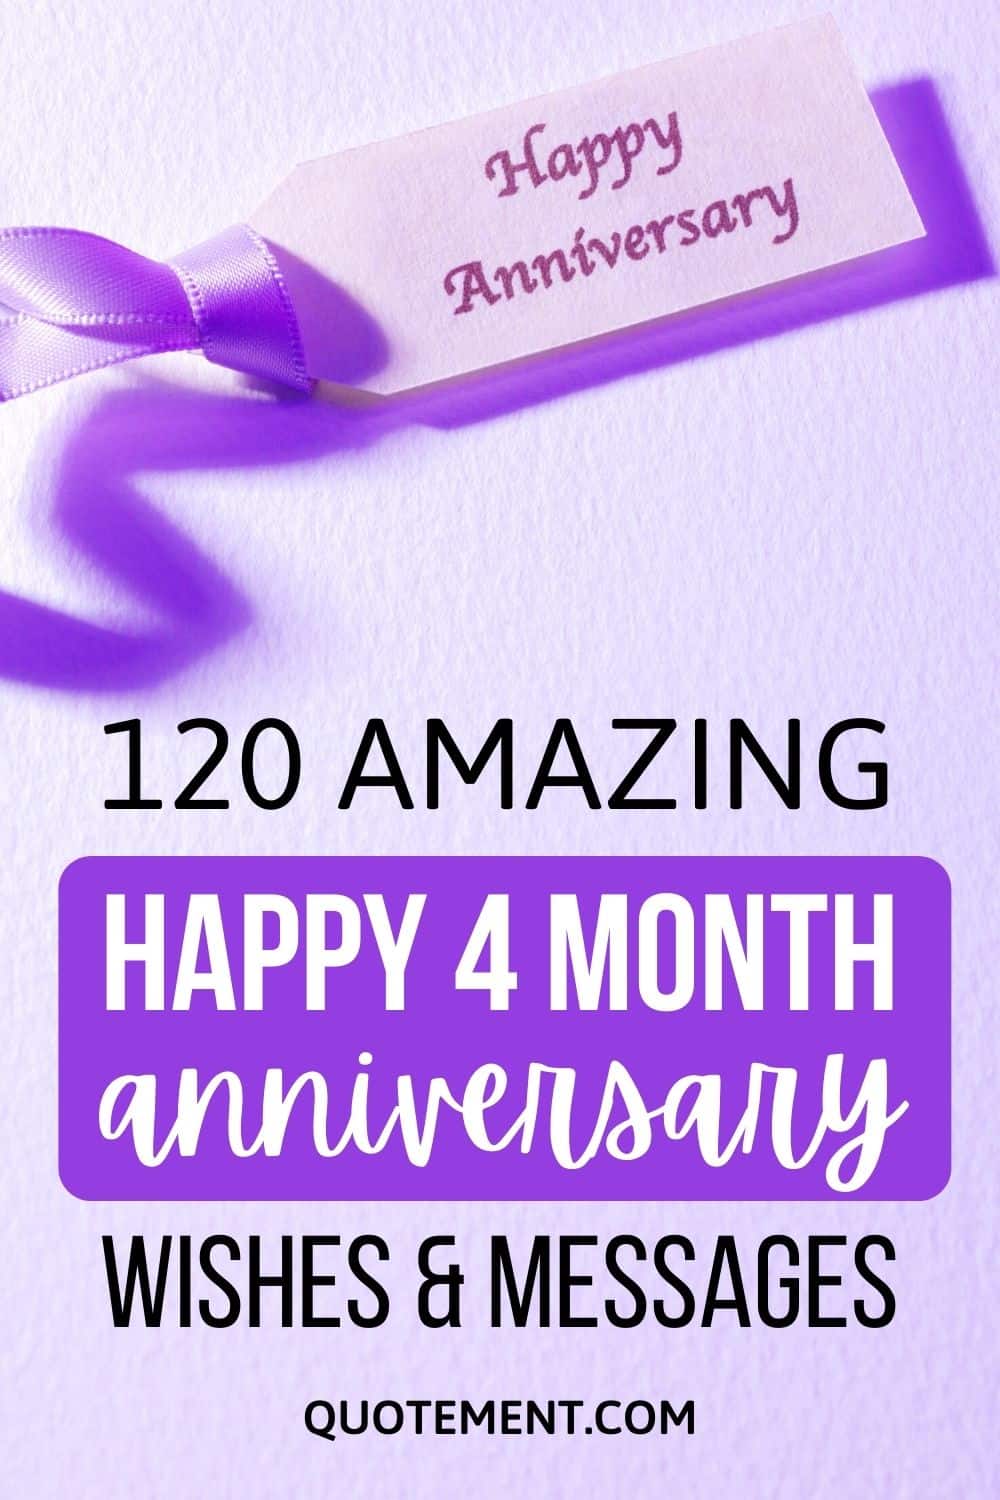 120 Amazing Happy 4 Month Anniversary Wishes & Messages 